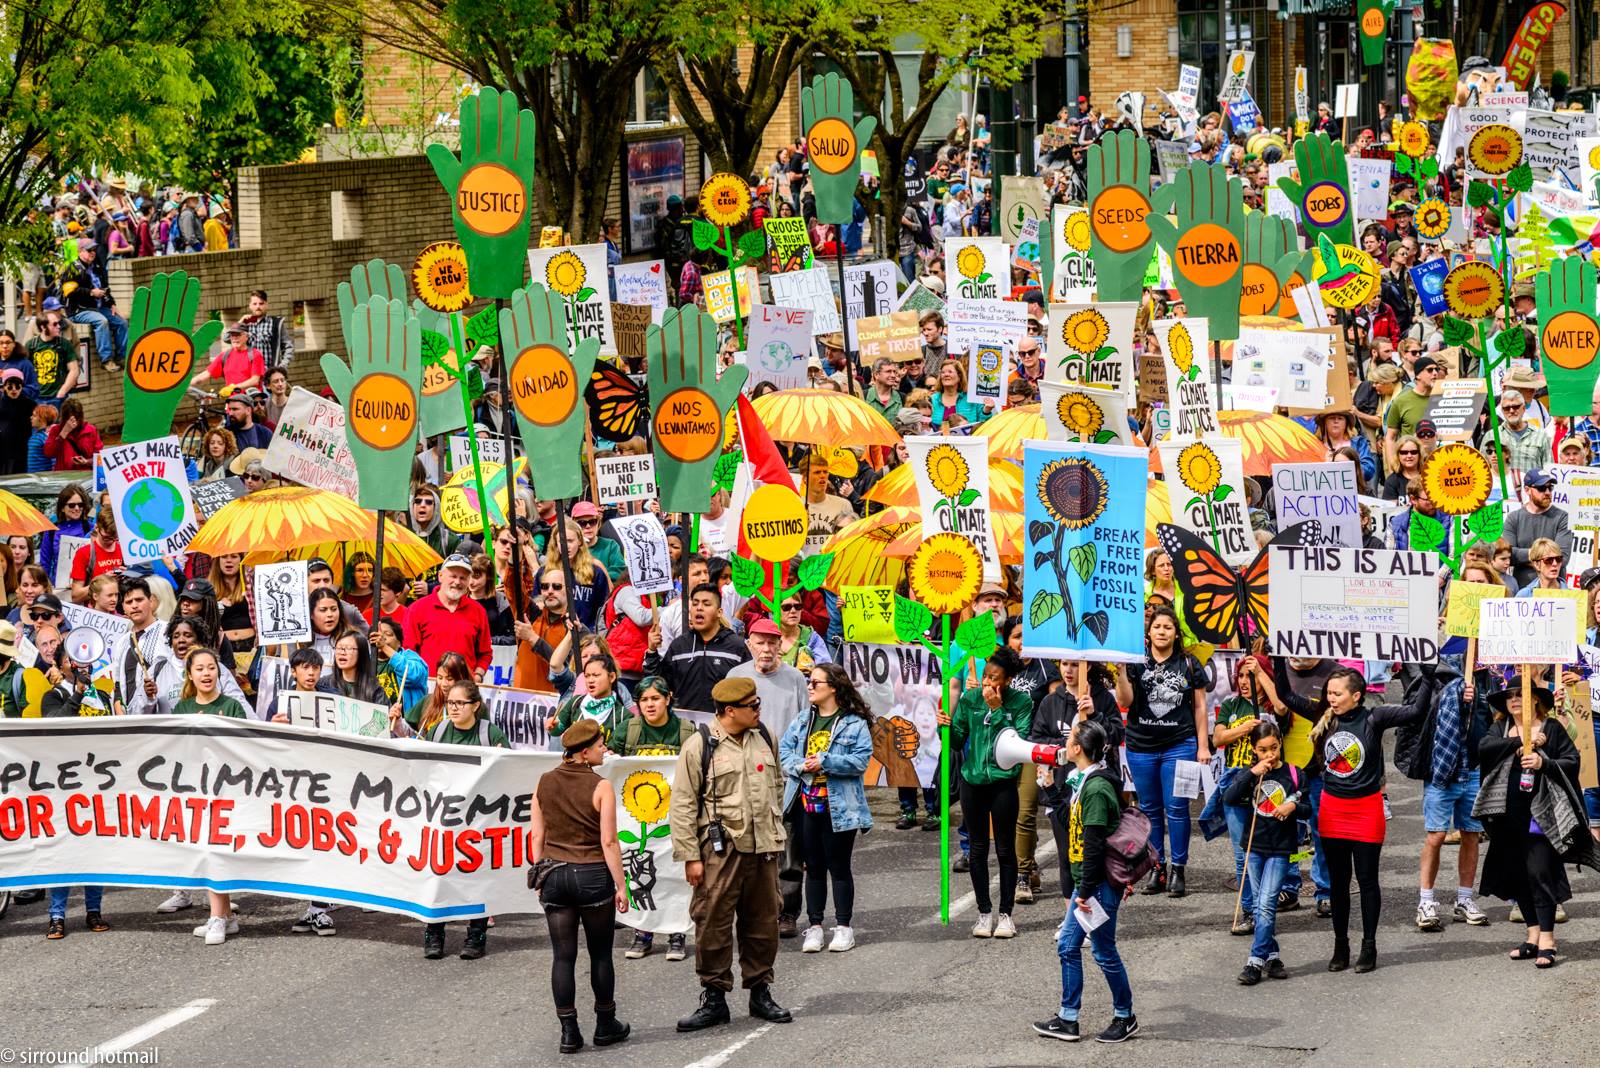 From the Portland Climate March KBOO